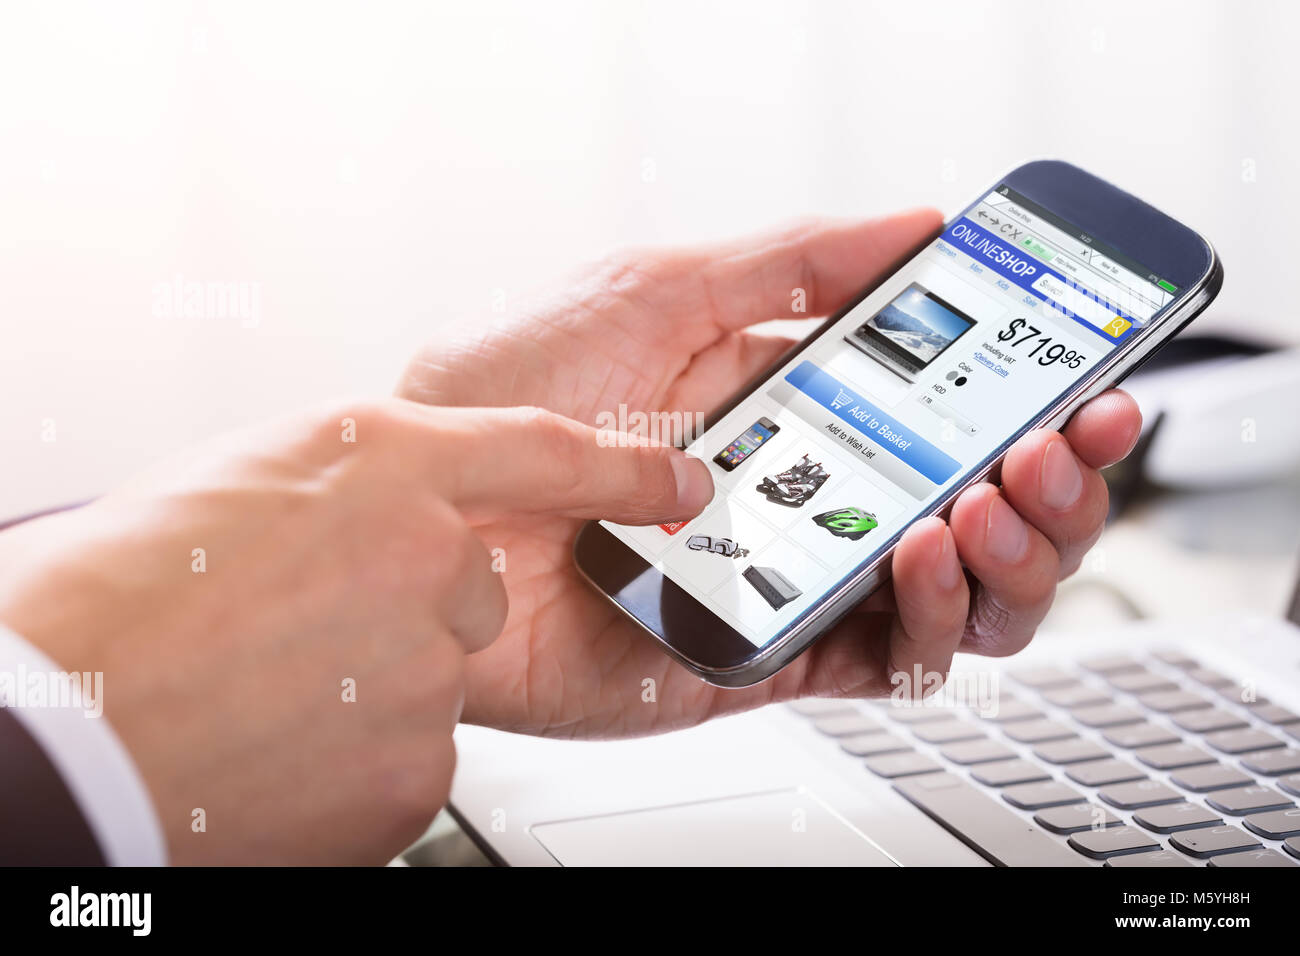 Close-up Of A Businessperson's Hand Shopping Online On Smartphone Stock Photo